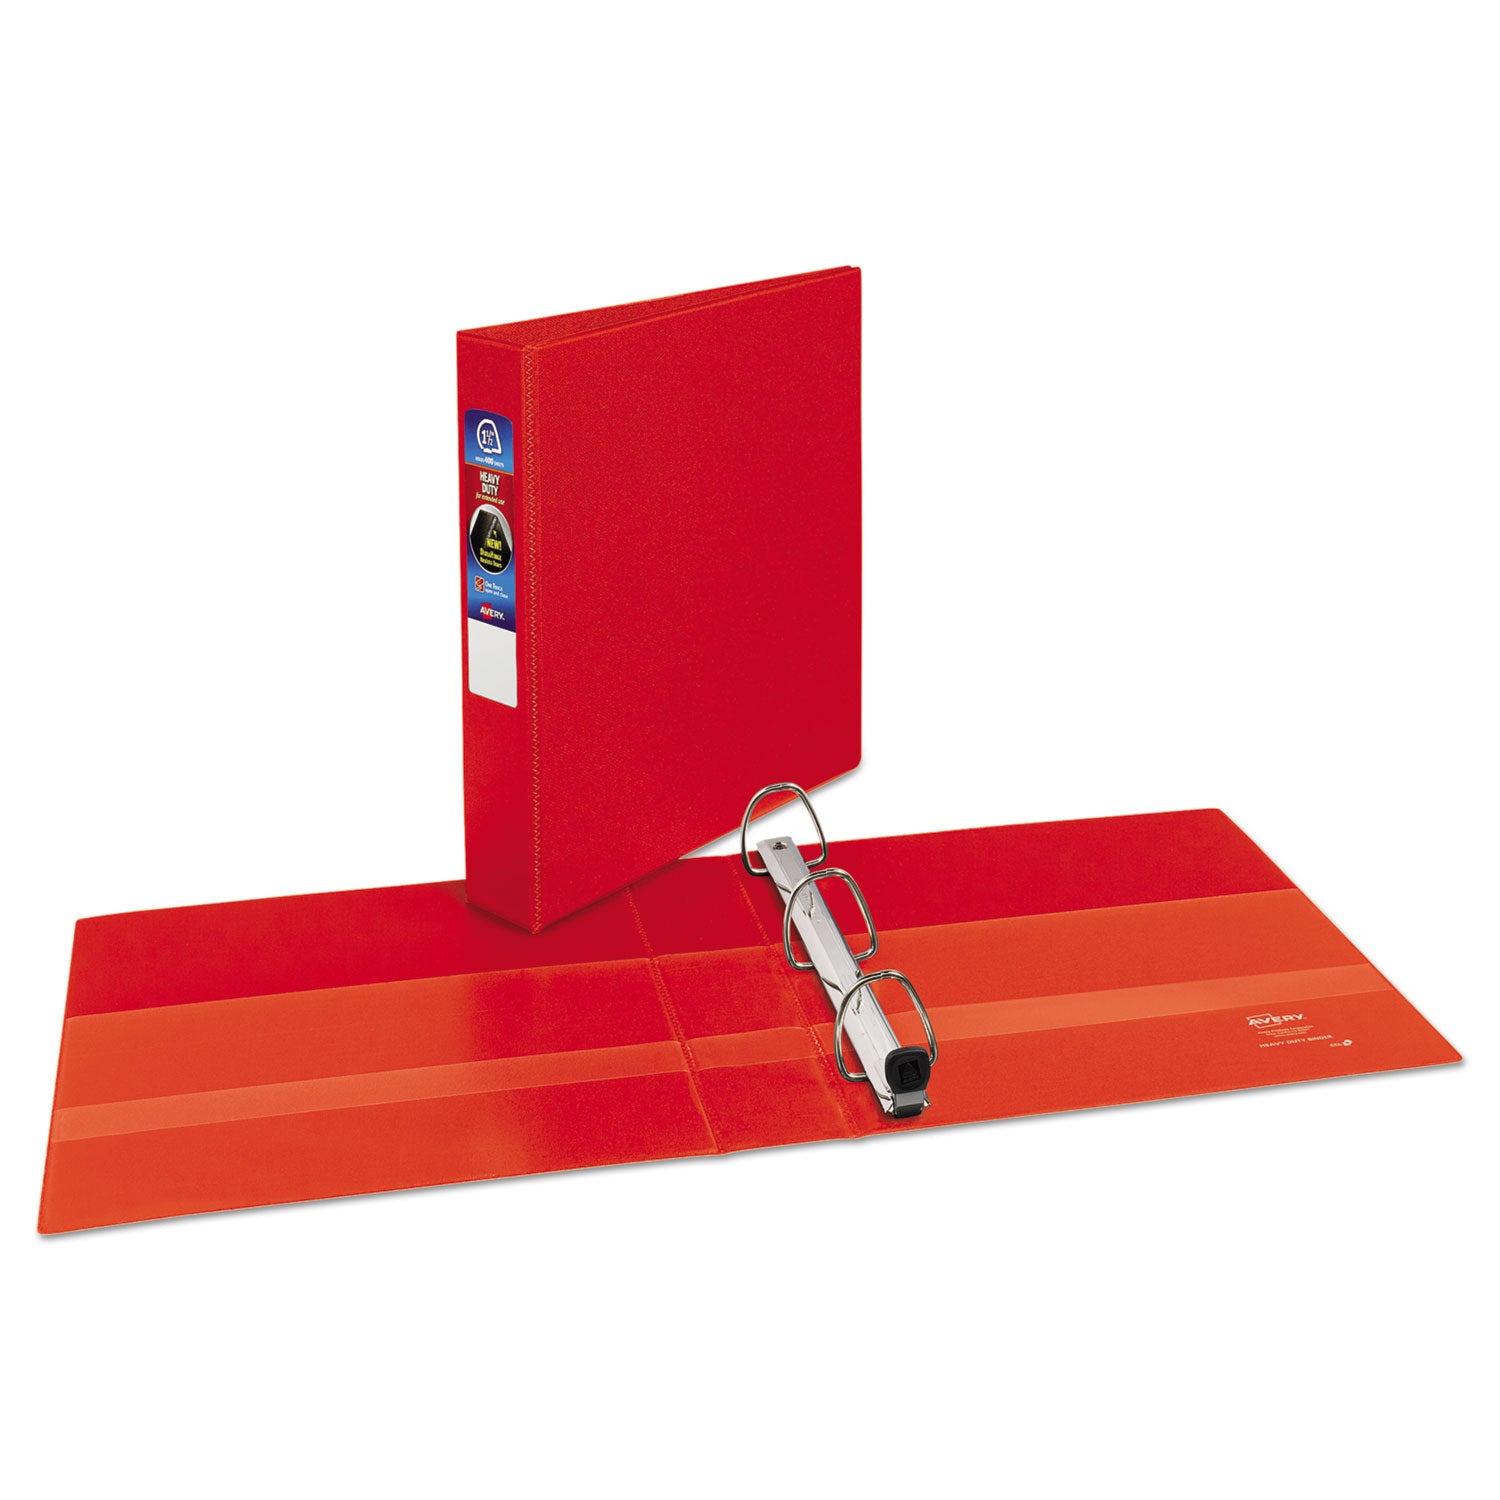 Heavy-Duty Non-View Binder with DuraHinge and One Touch EZD Rings, 3 Rings, 1.5" Capacity, 11 x 8.5, Red - 